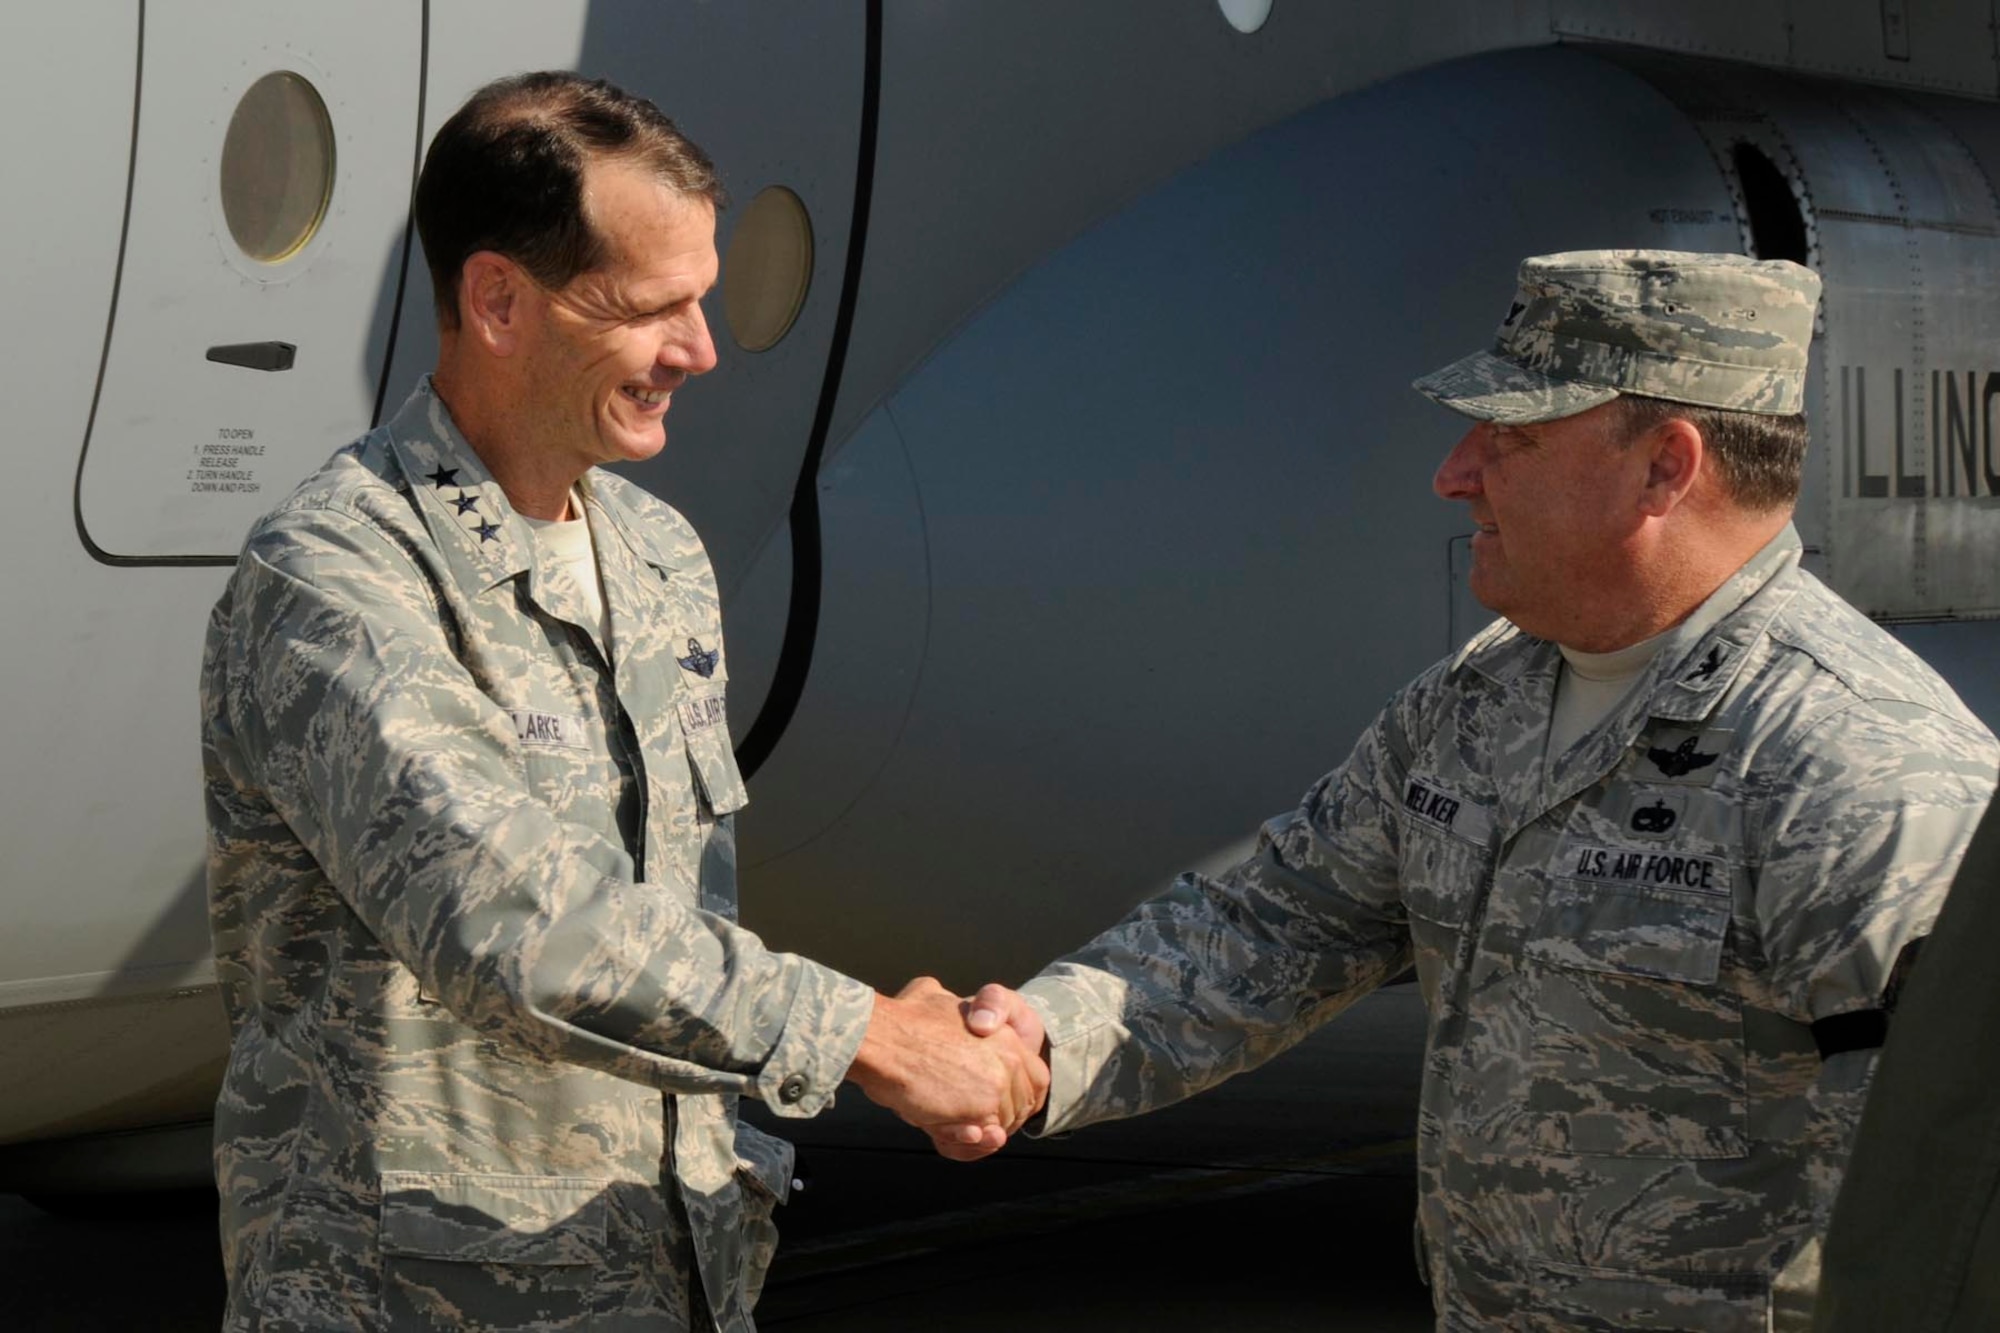 Lt. Gen. Stanley E. Clarke, Director of the Air National Guard, is greeted by Col. Barton Welker, Commander, 182nd Maintenance Group, after arriving for a site visit at the182nd Airlift Wing in Peoria, Ill. Sep. 6, 2013. (Air National Guard photo by Tech. Sgt. Todd Pendleton/released)